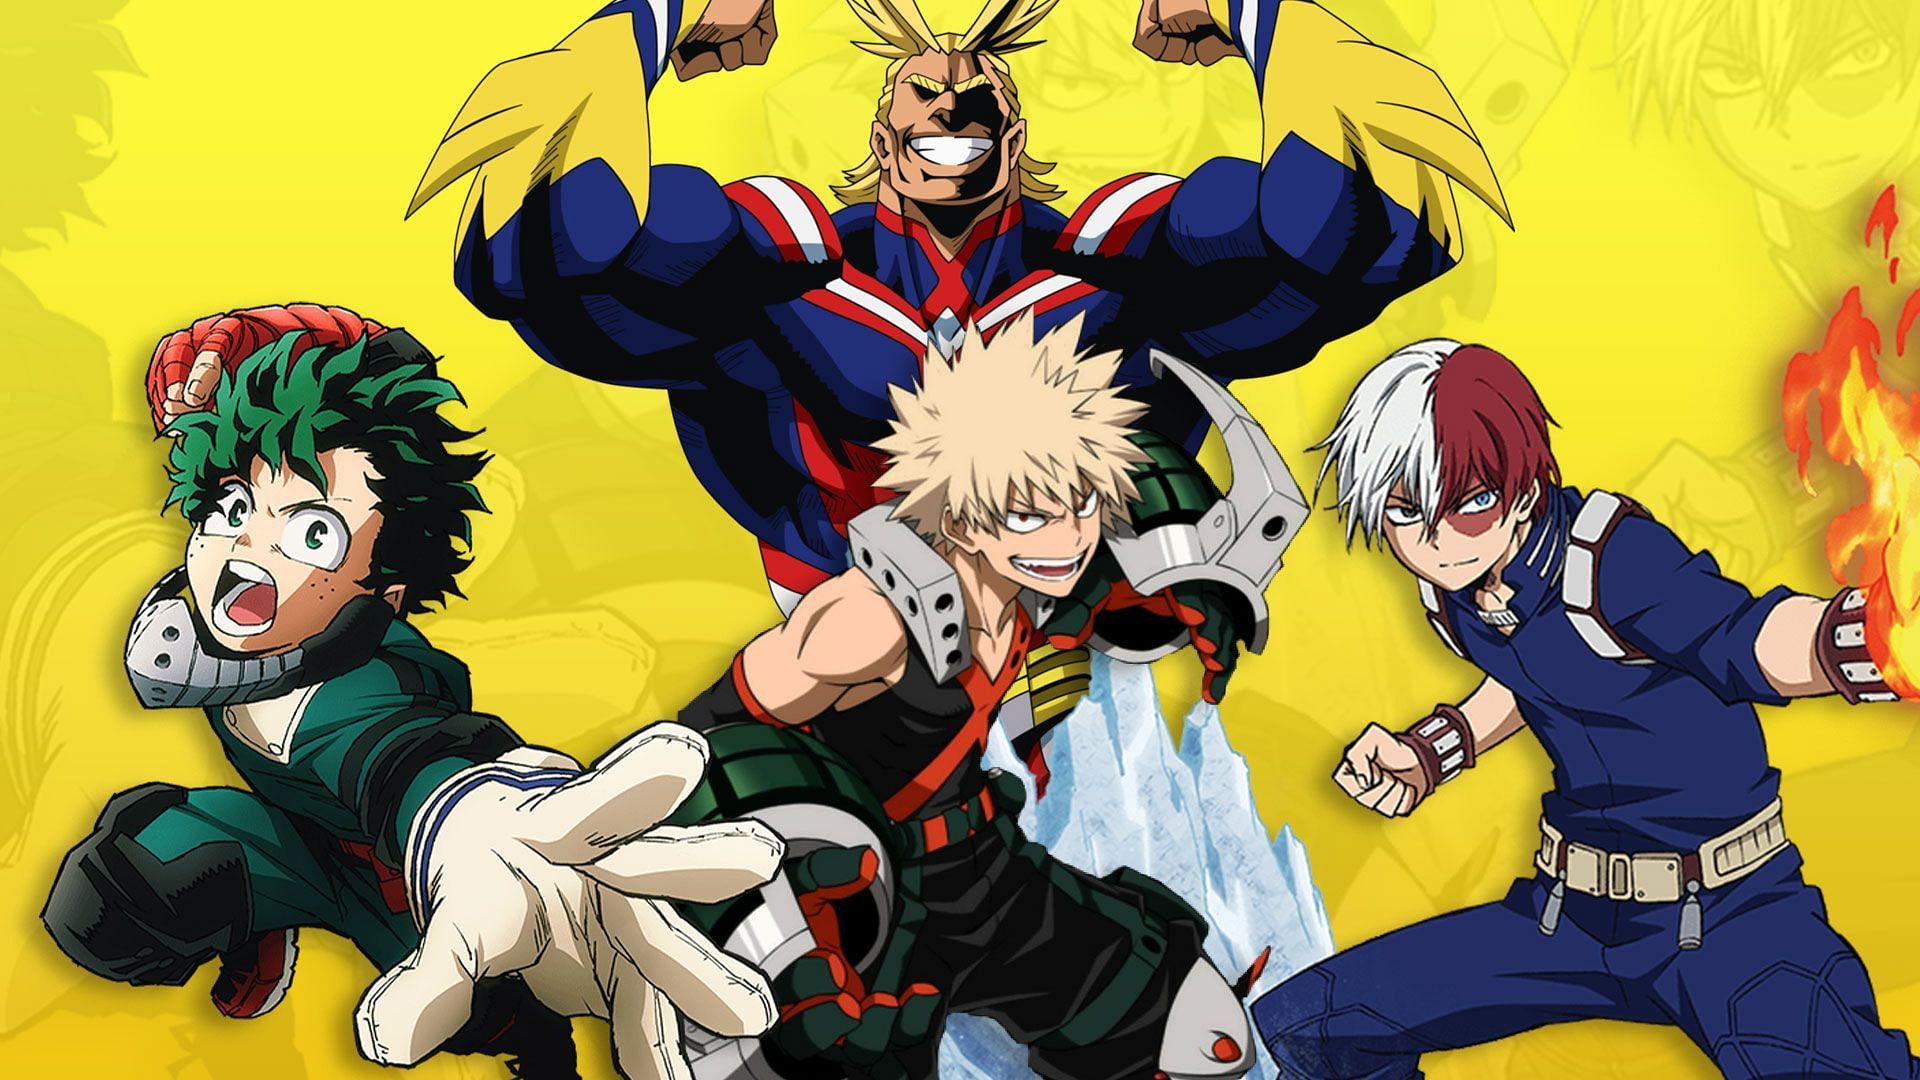 My Hero Academia chapter 362 raw scans and spoilers: Bakugo's final attack  on AFO leads to a tragedy